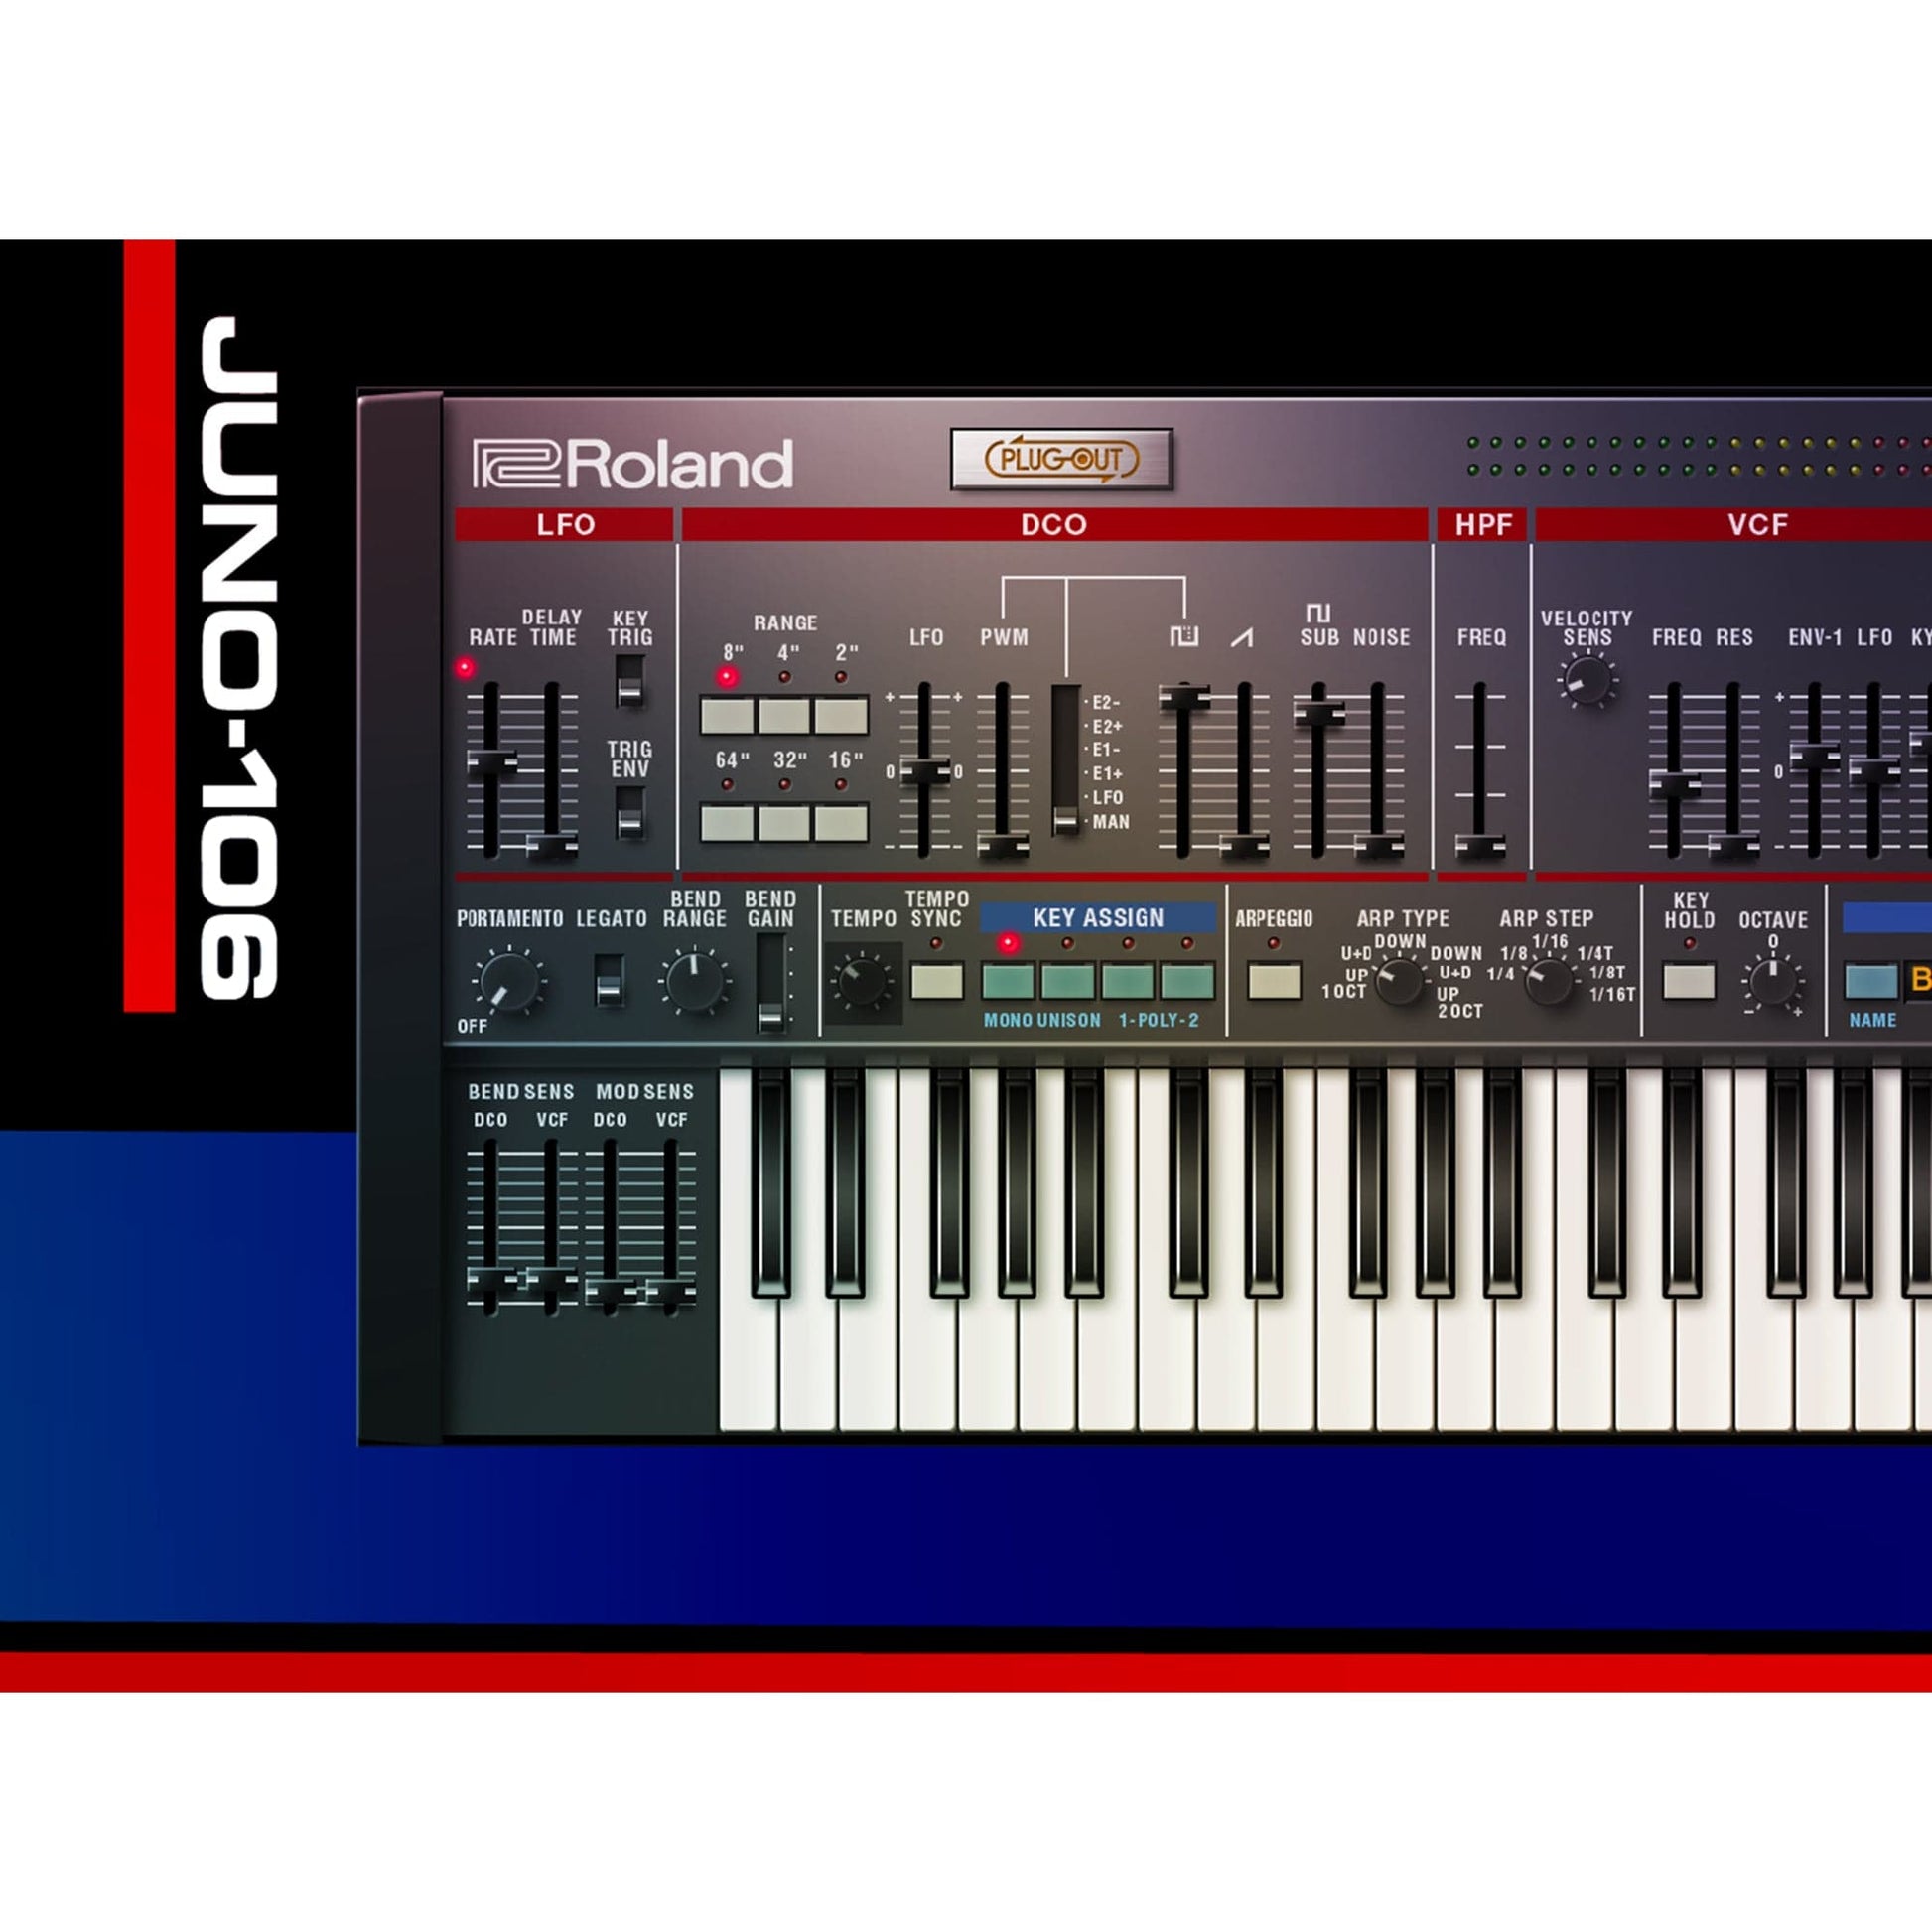 Roland JUNO-106 Software Synthesizer Download